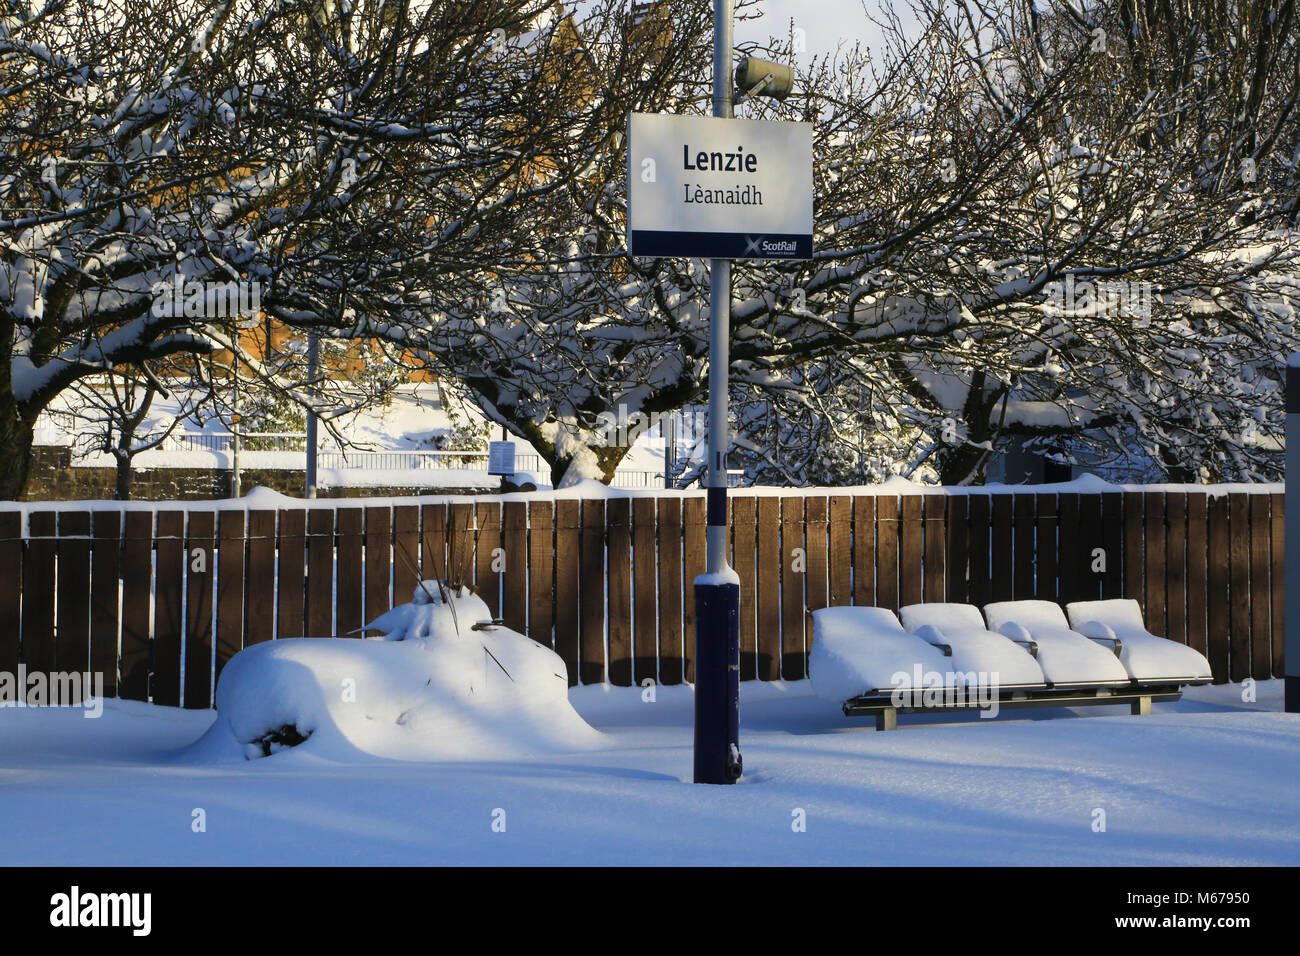 Glasgow, UK. 1st Mar, 2018. UK Weather: Glasgow, UK. 1st Mar, 2018. UK Weather: Winter at Lenzie Station on the Glasgow - Edinburgh Rail Line. The station was closed due to the adverse weather conditions. The snow had covered the rail tracks due to the weather from the Beast from the East. However, there were very few cars on the road and side roads throughout Lenzie were blocked with deep snow. People had generally decided that there were not going to work. Credit: JamieD888/Alamy Live News Credit: JamieD888/Alamy Live News Stock Photo